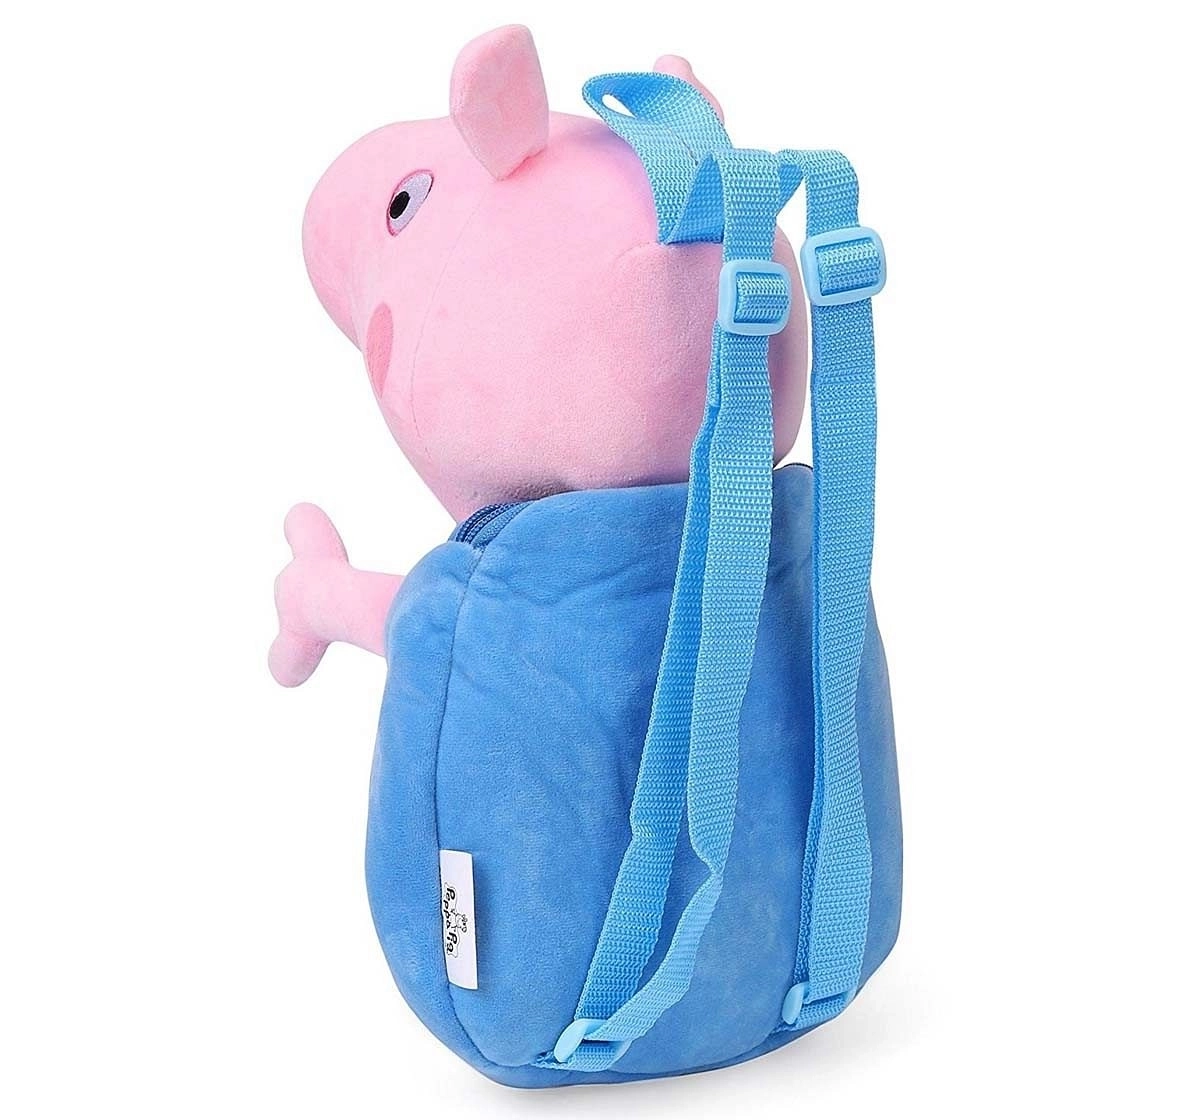 Peppa and George Pig Soft Toy Bag, Multi Color, 44 Cm Plush Accessories for Kids age 2Y+